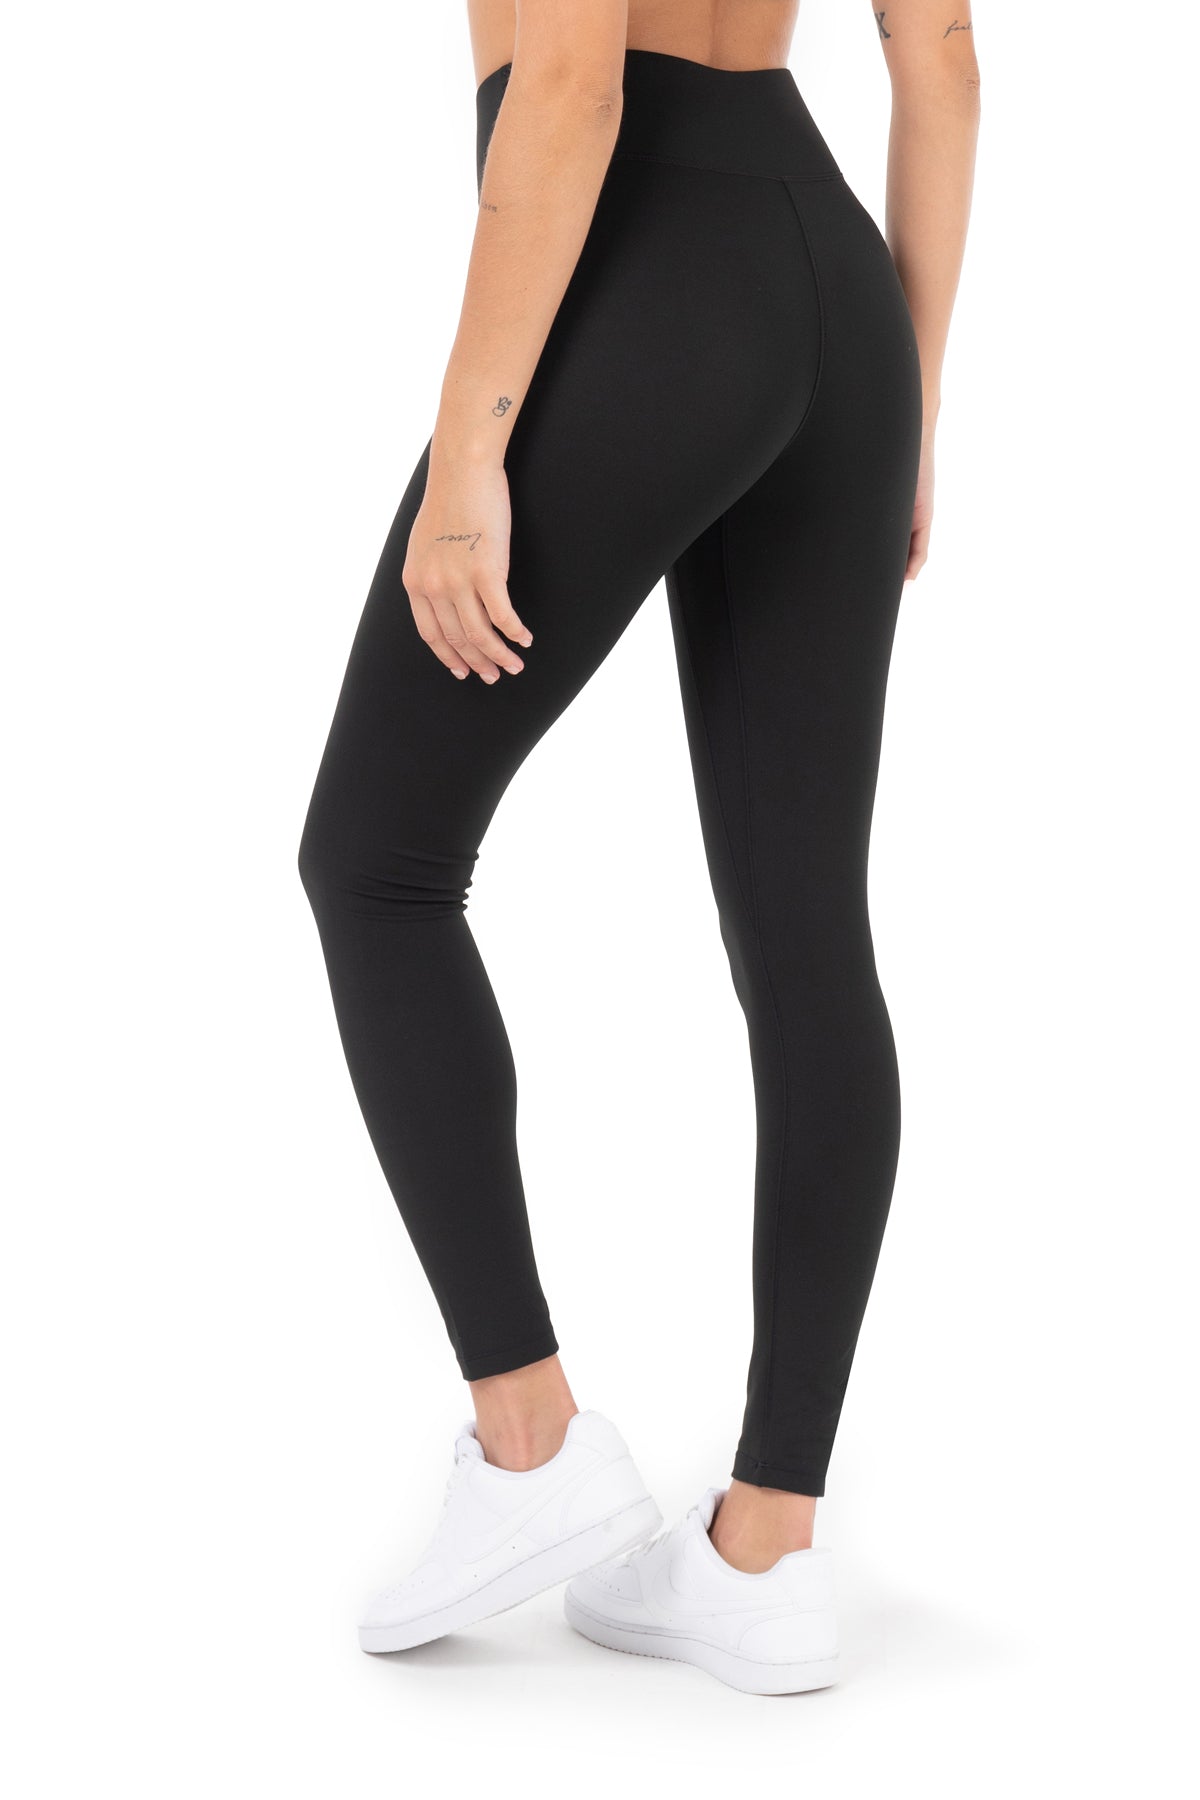 Workout Outfit, Sports Leggings Elastic Breathable Soft Pure Color